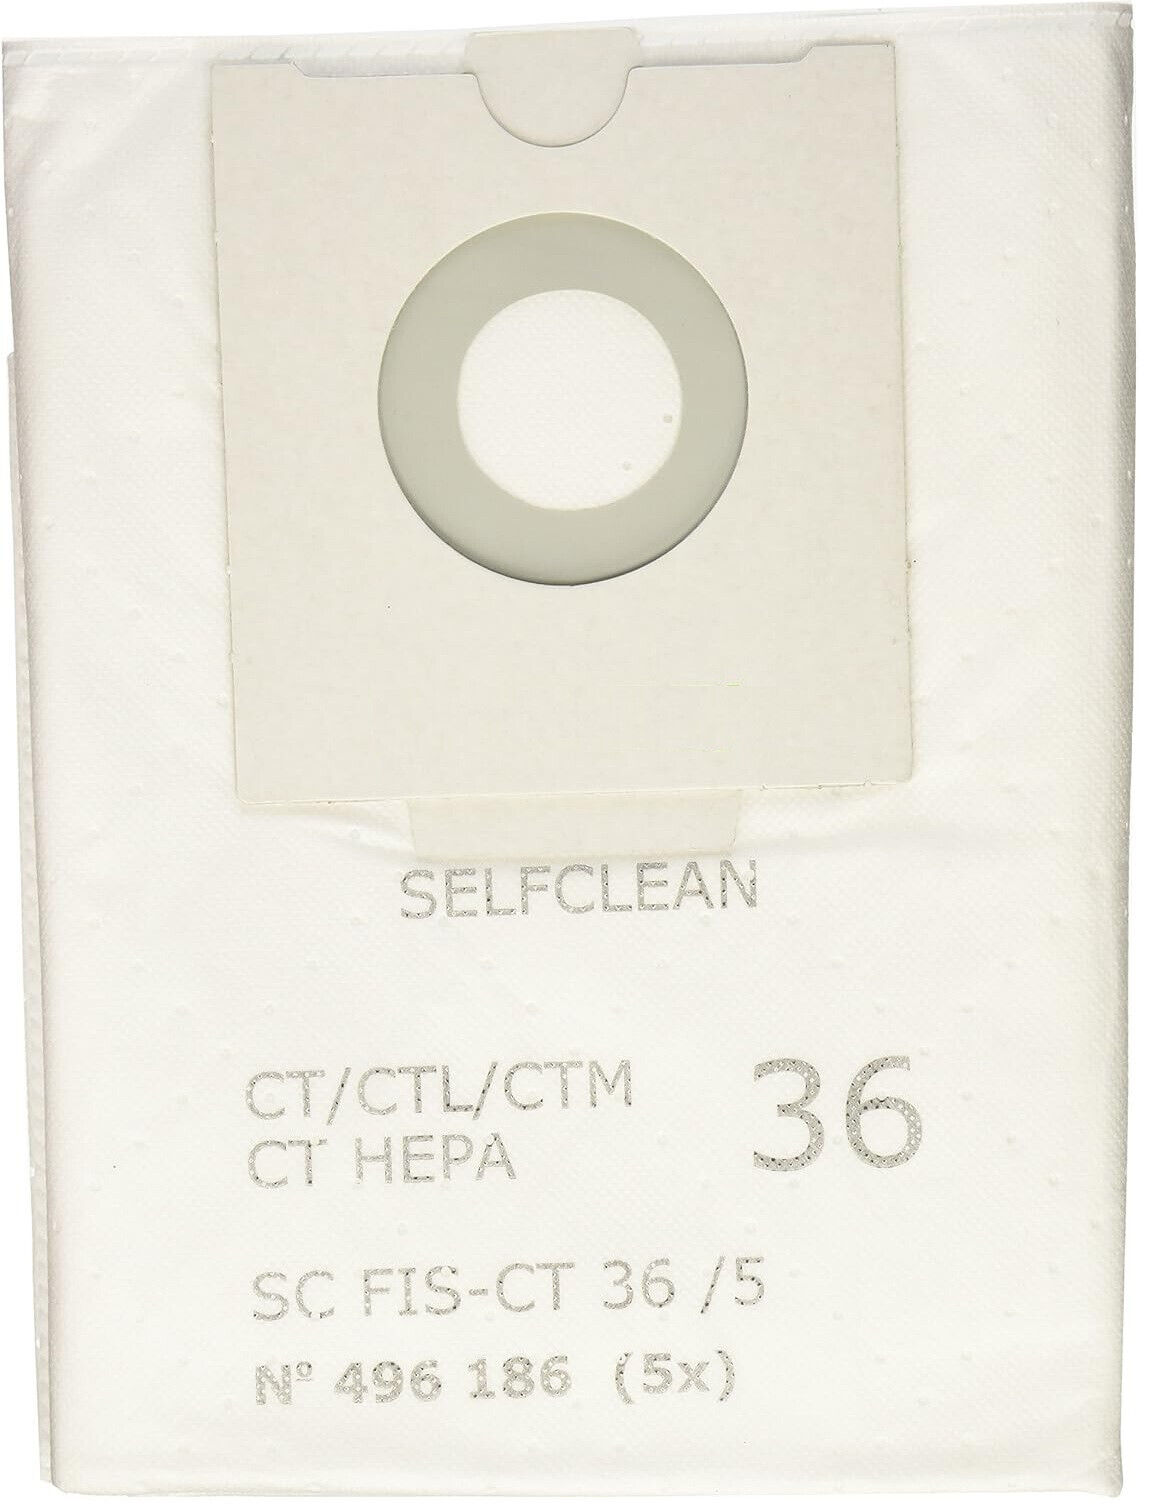 Fits Festool CT-36 Dust Extractor SelfClean 496186 Filter Bags 5-PK